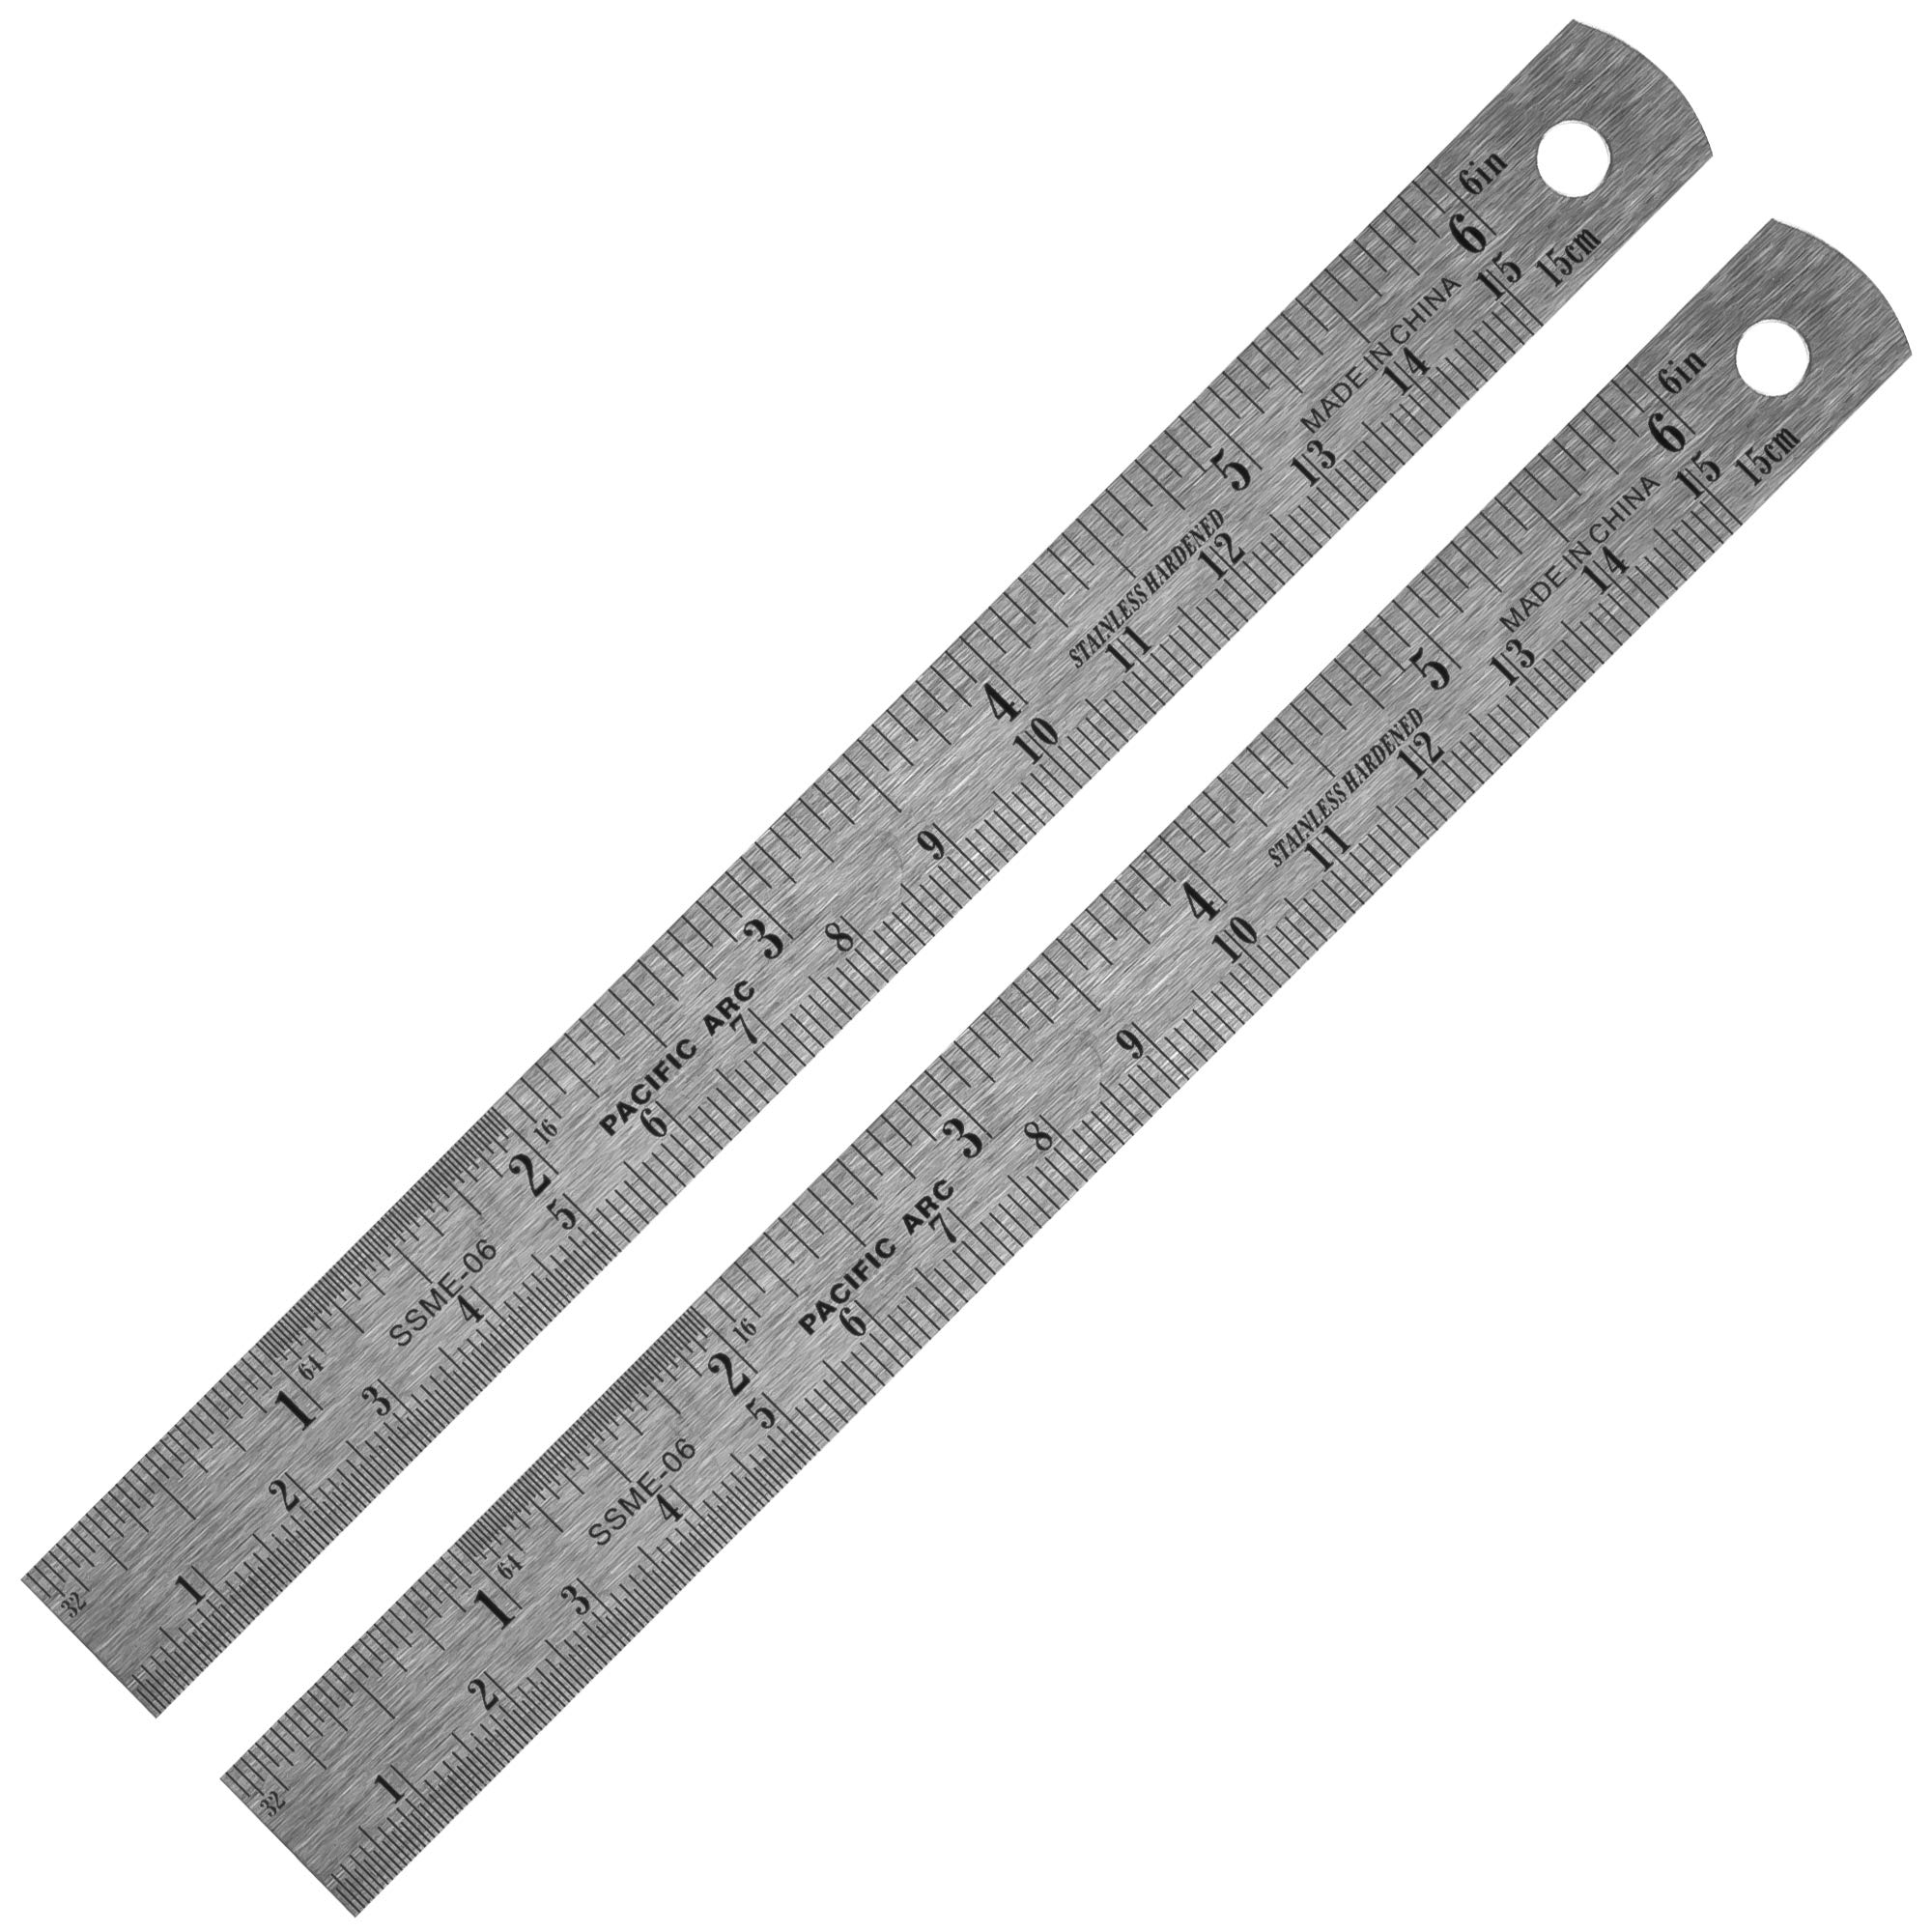 Pacific Arc 6 Inch Stainless Steel Ruler With Inchmetric Conversion Table, 2 Pack